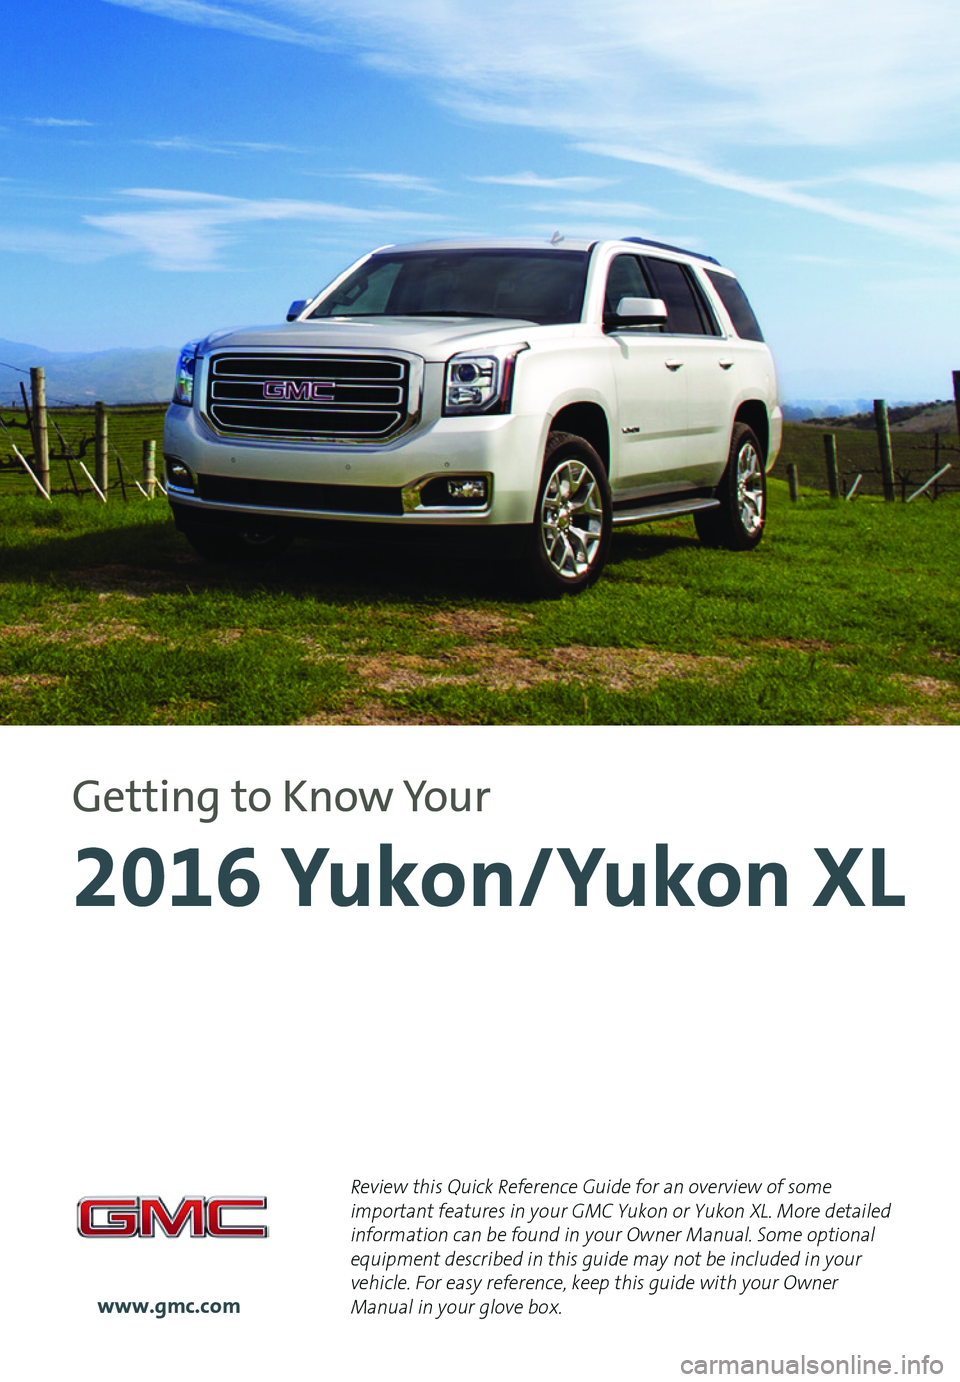 GMC YUKON 2016  Get To Know Guide 1
Review this Quick Reference Guide for an overview of some important features in your GMC Yukon or Yukon XL. More detailed information can be found in your Owner Manual. Some optional equipment descr